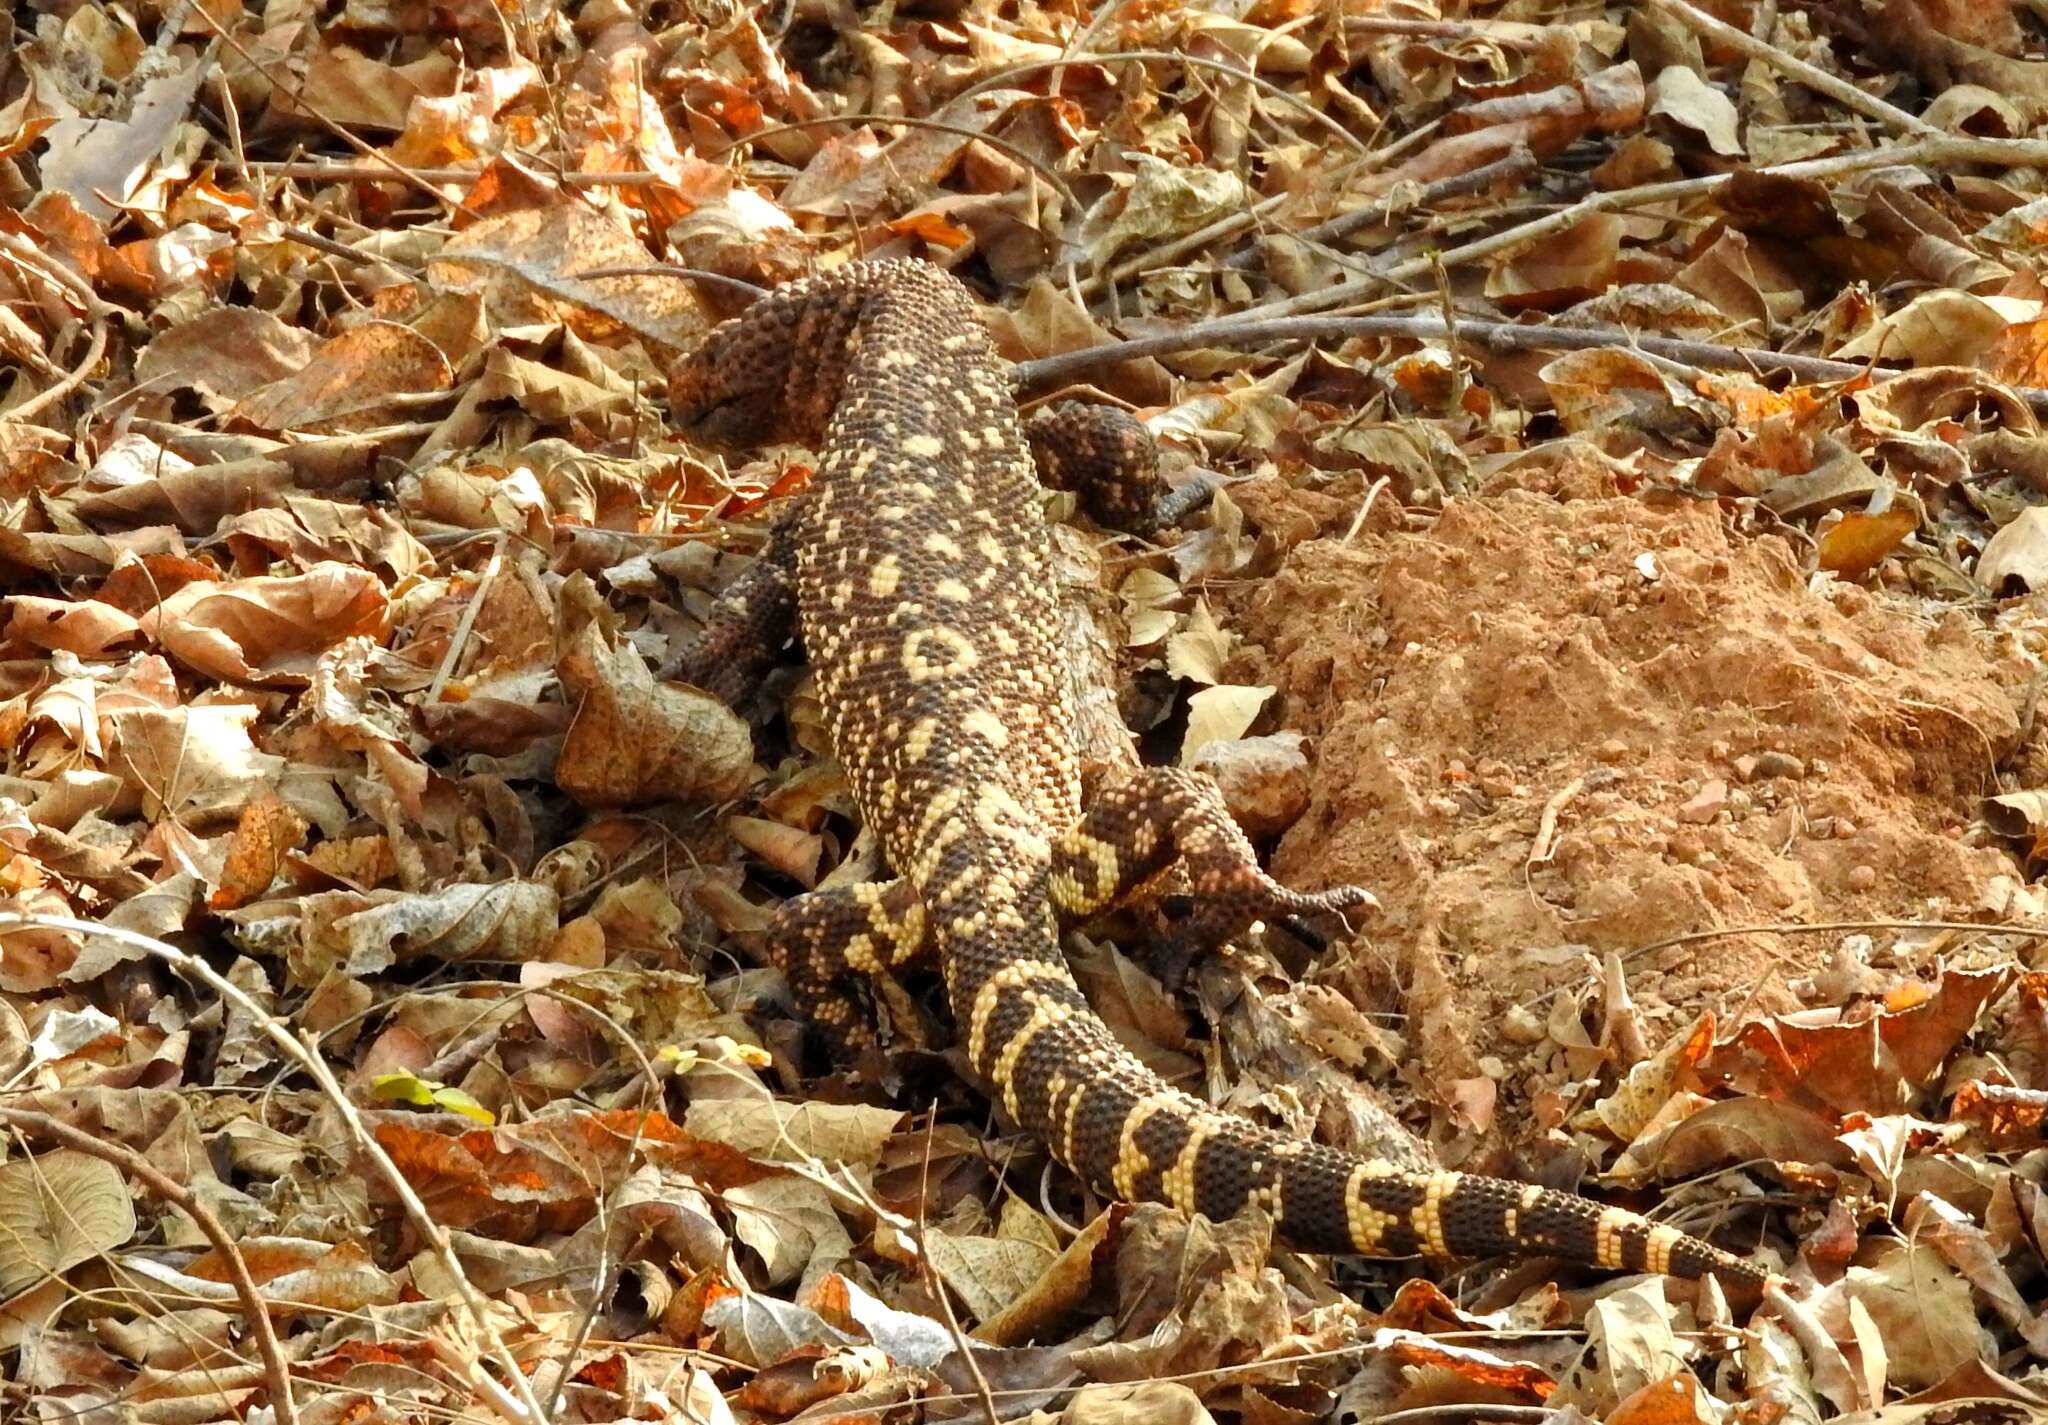 Image of Mexican Beaded Lizard